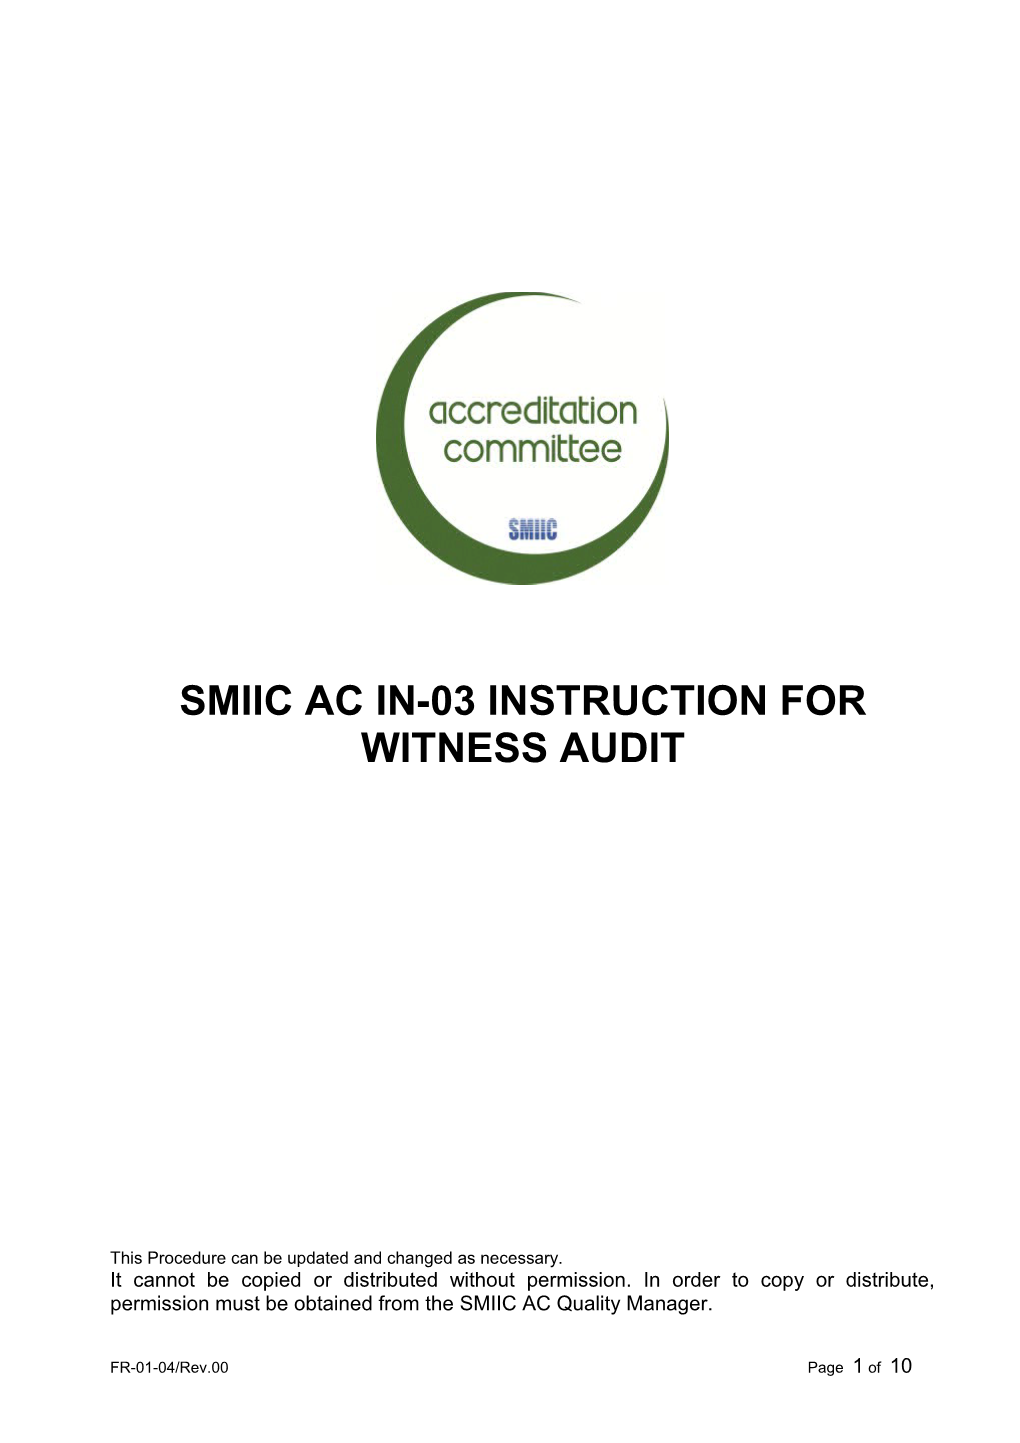 Smiic Ac In-03Instruction for Witness Audit